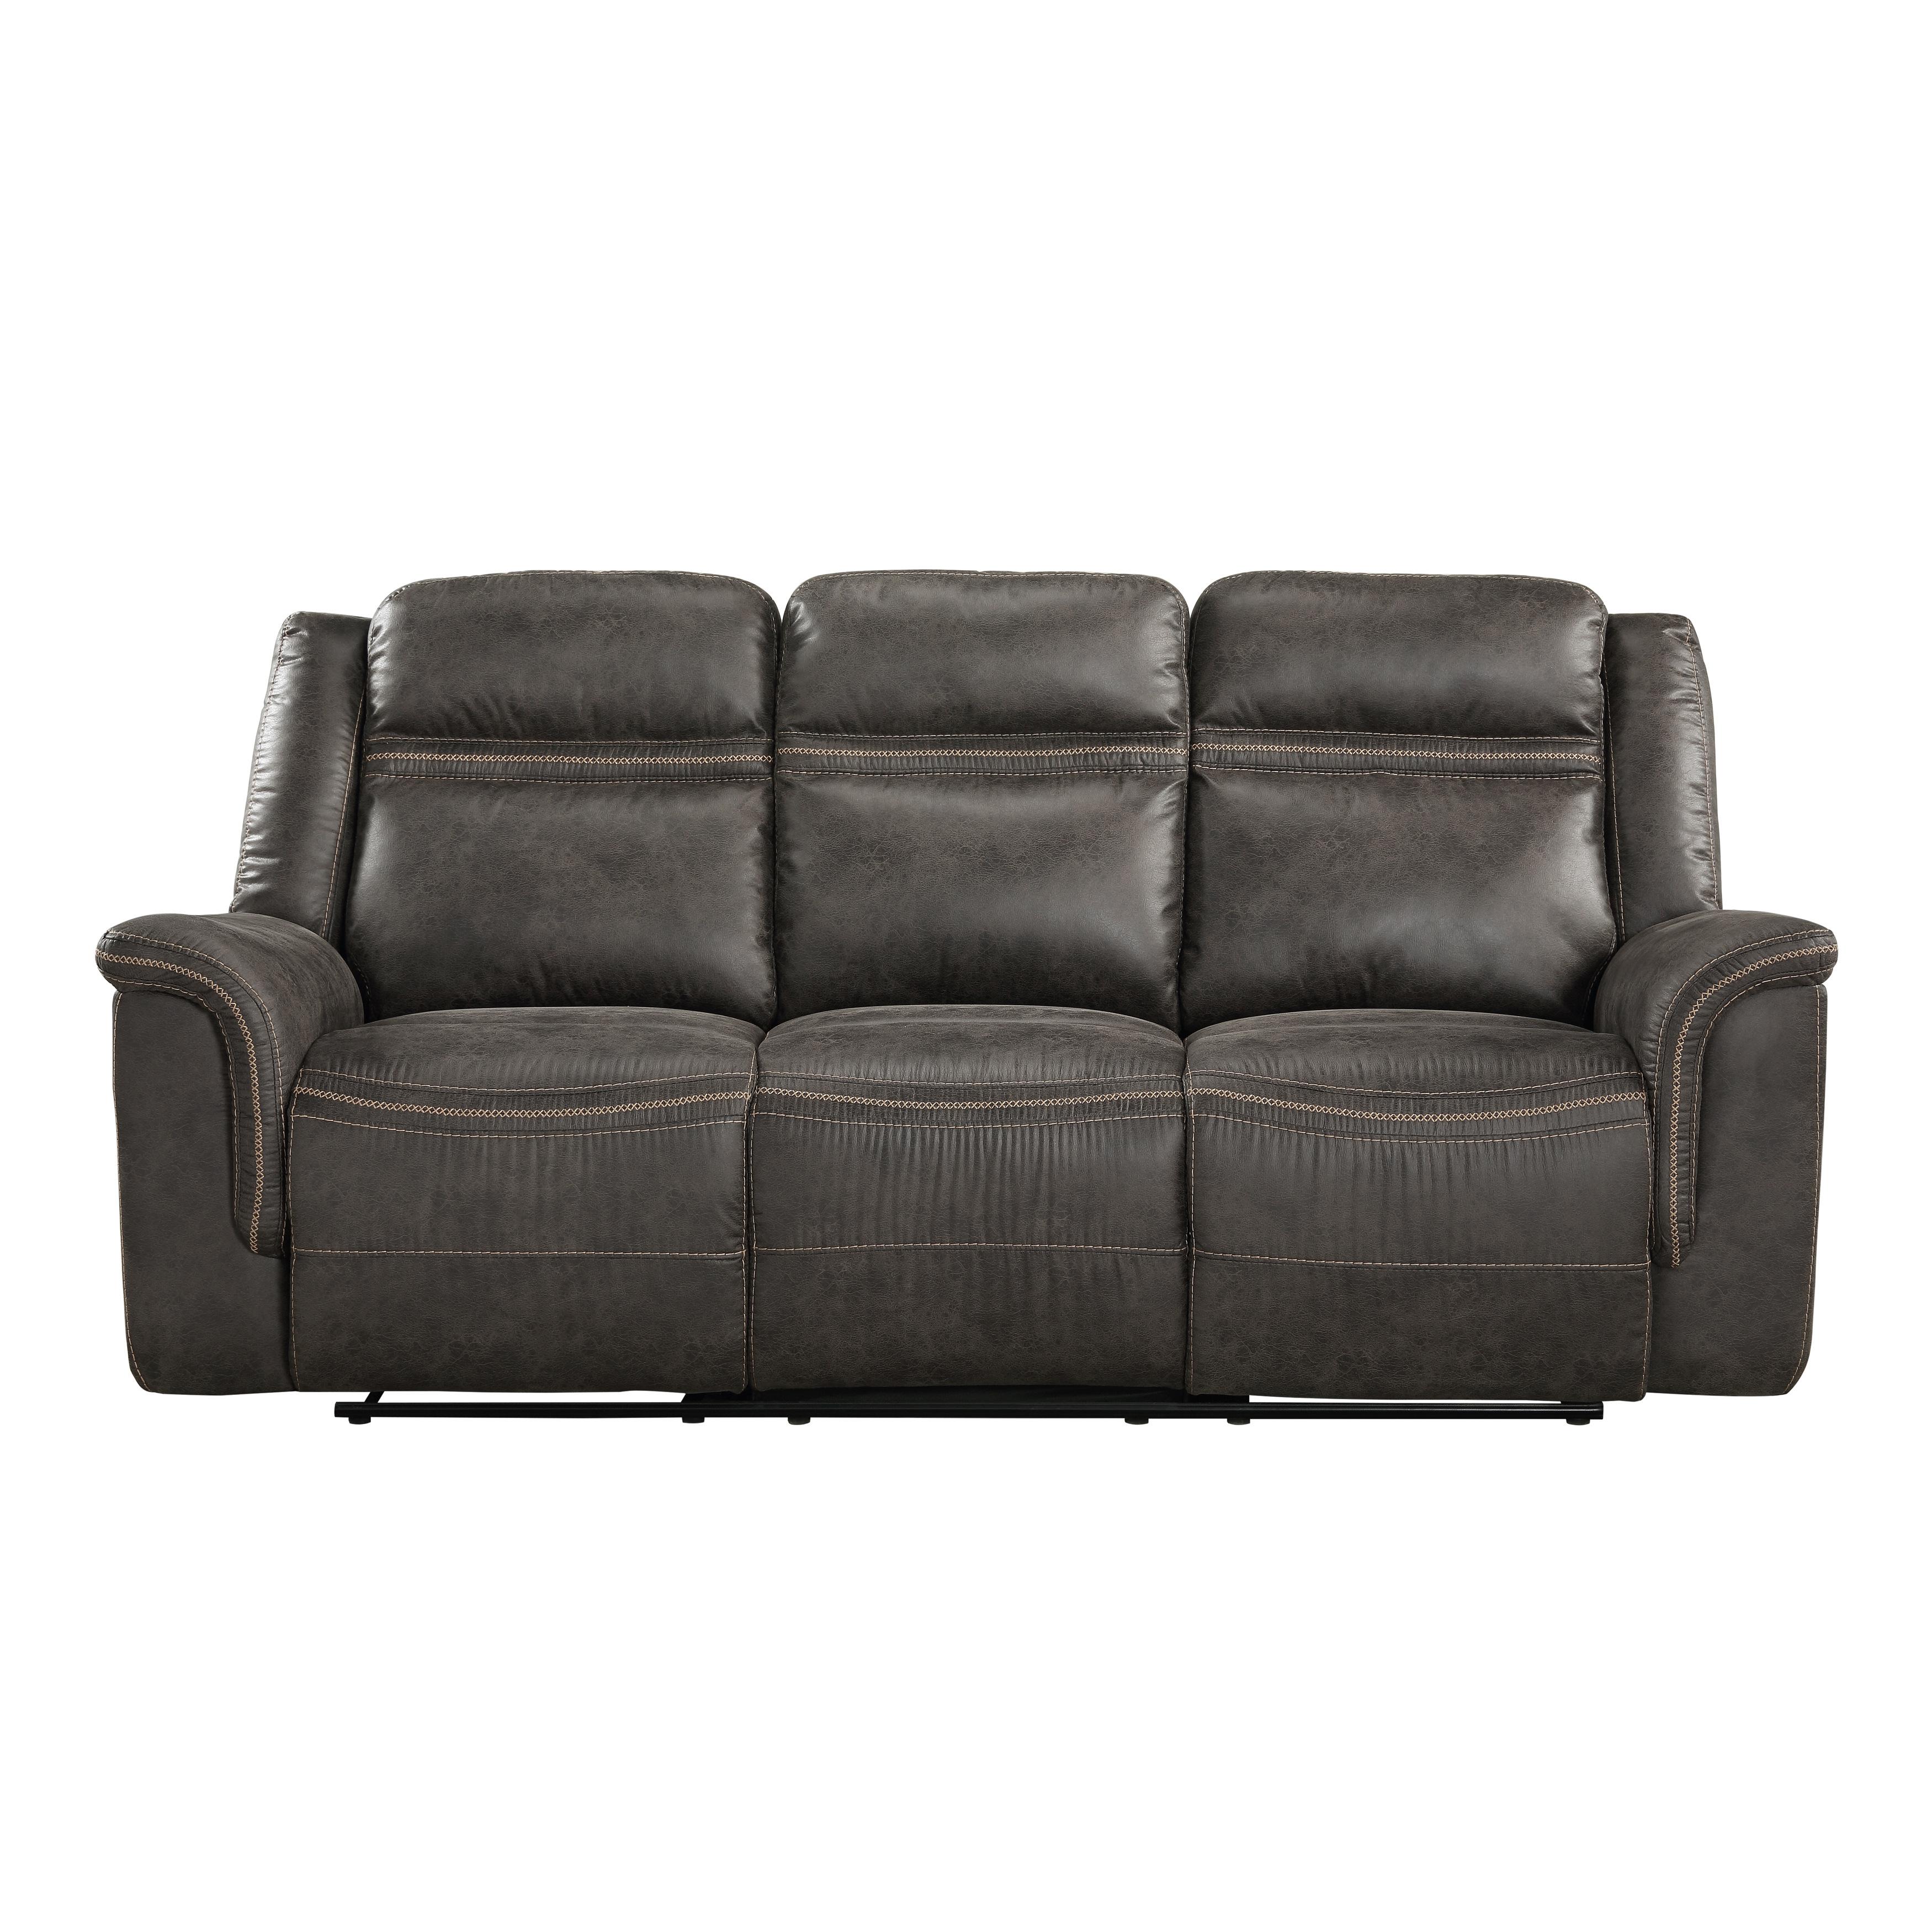 Transitional Reclining Sofa 9426-3 Boise 9426-3 in Brown Microfiber